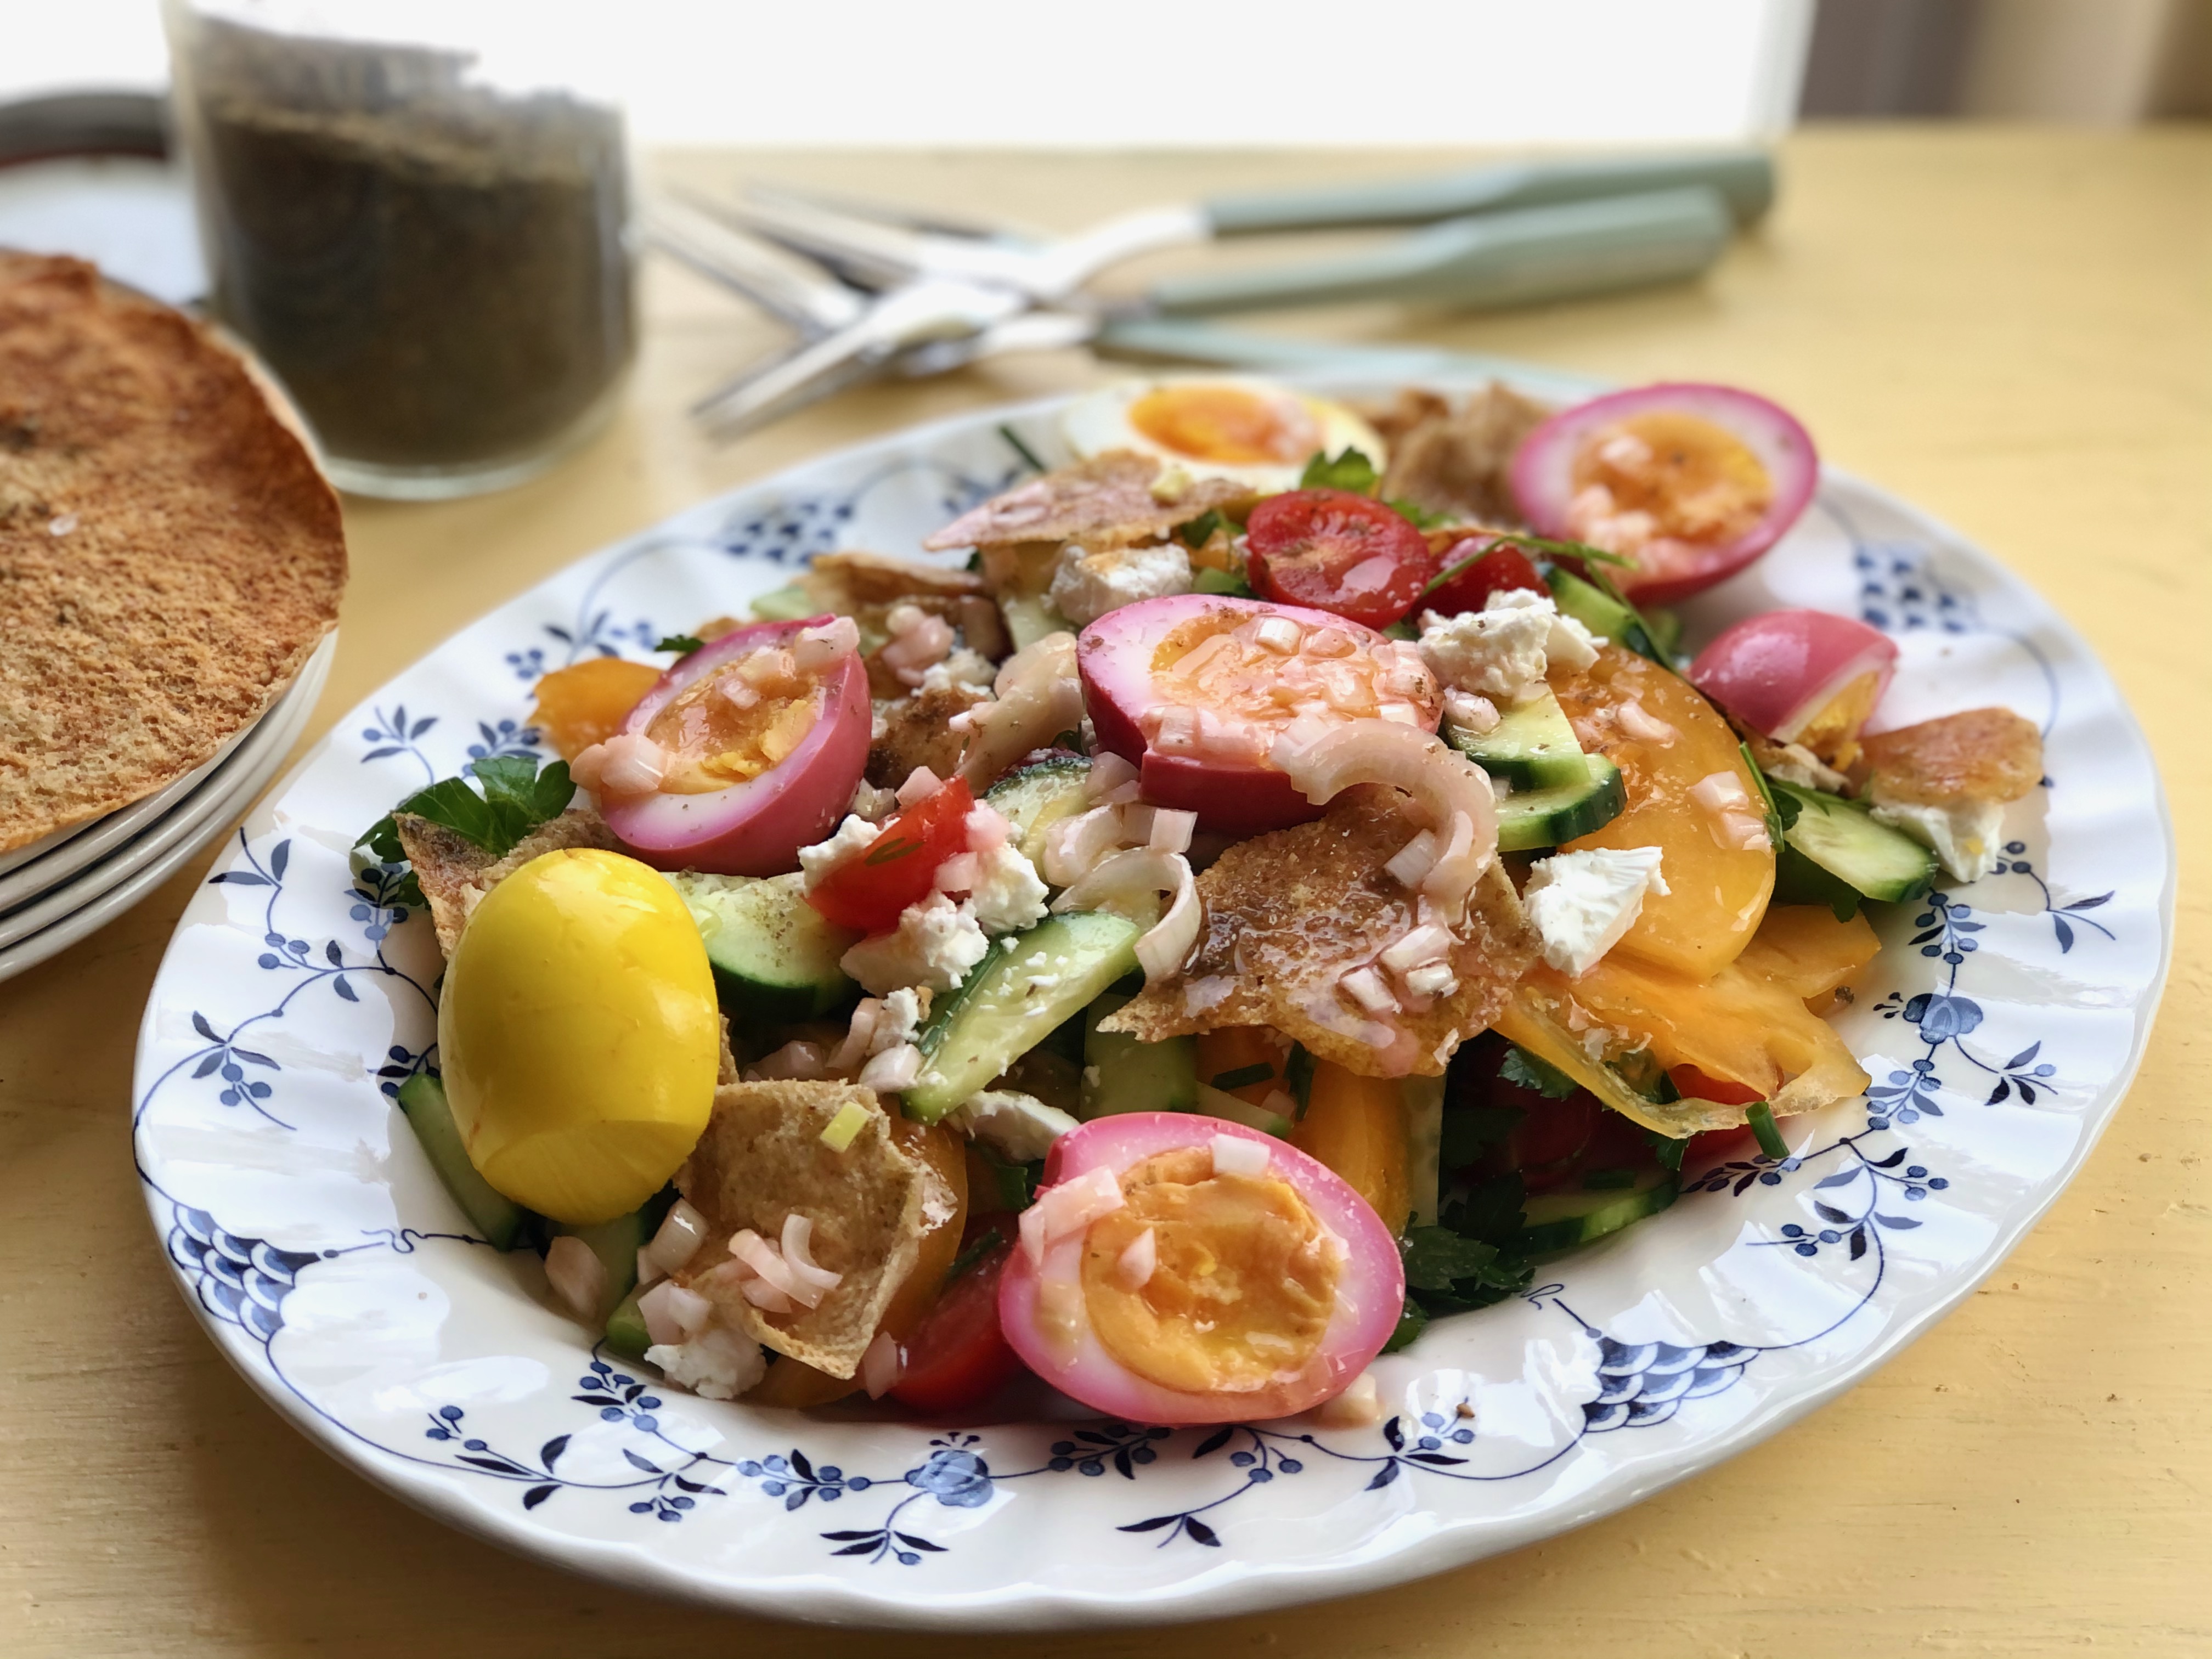 Featured image for “Rainbow Eggs and Toasted Pita Salad”